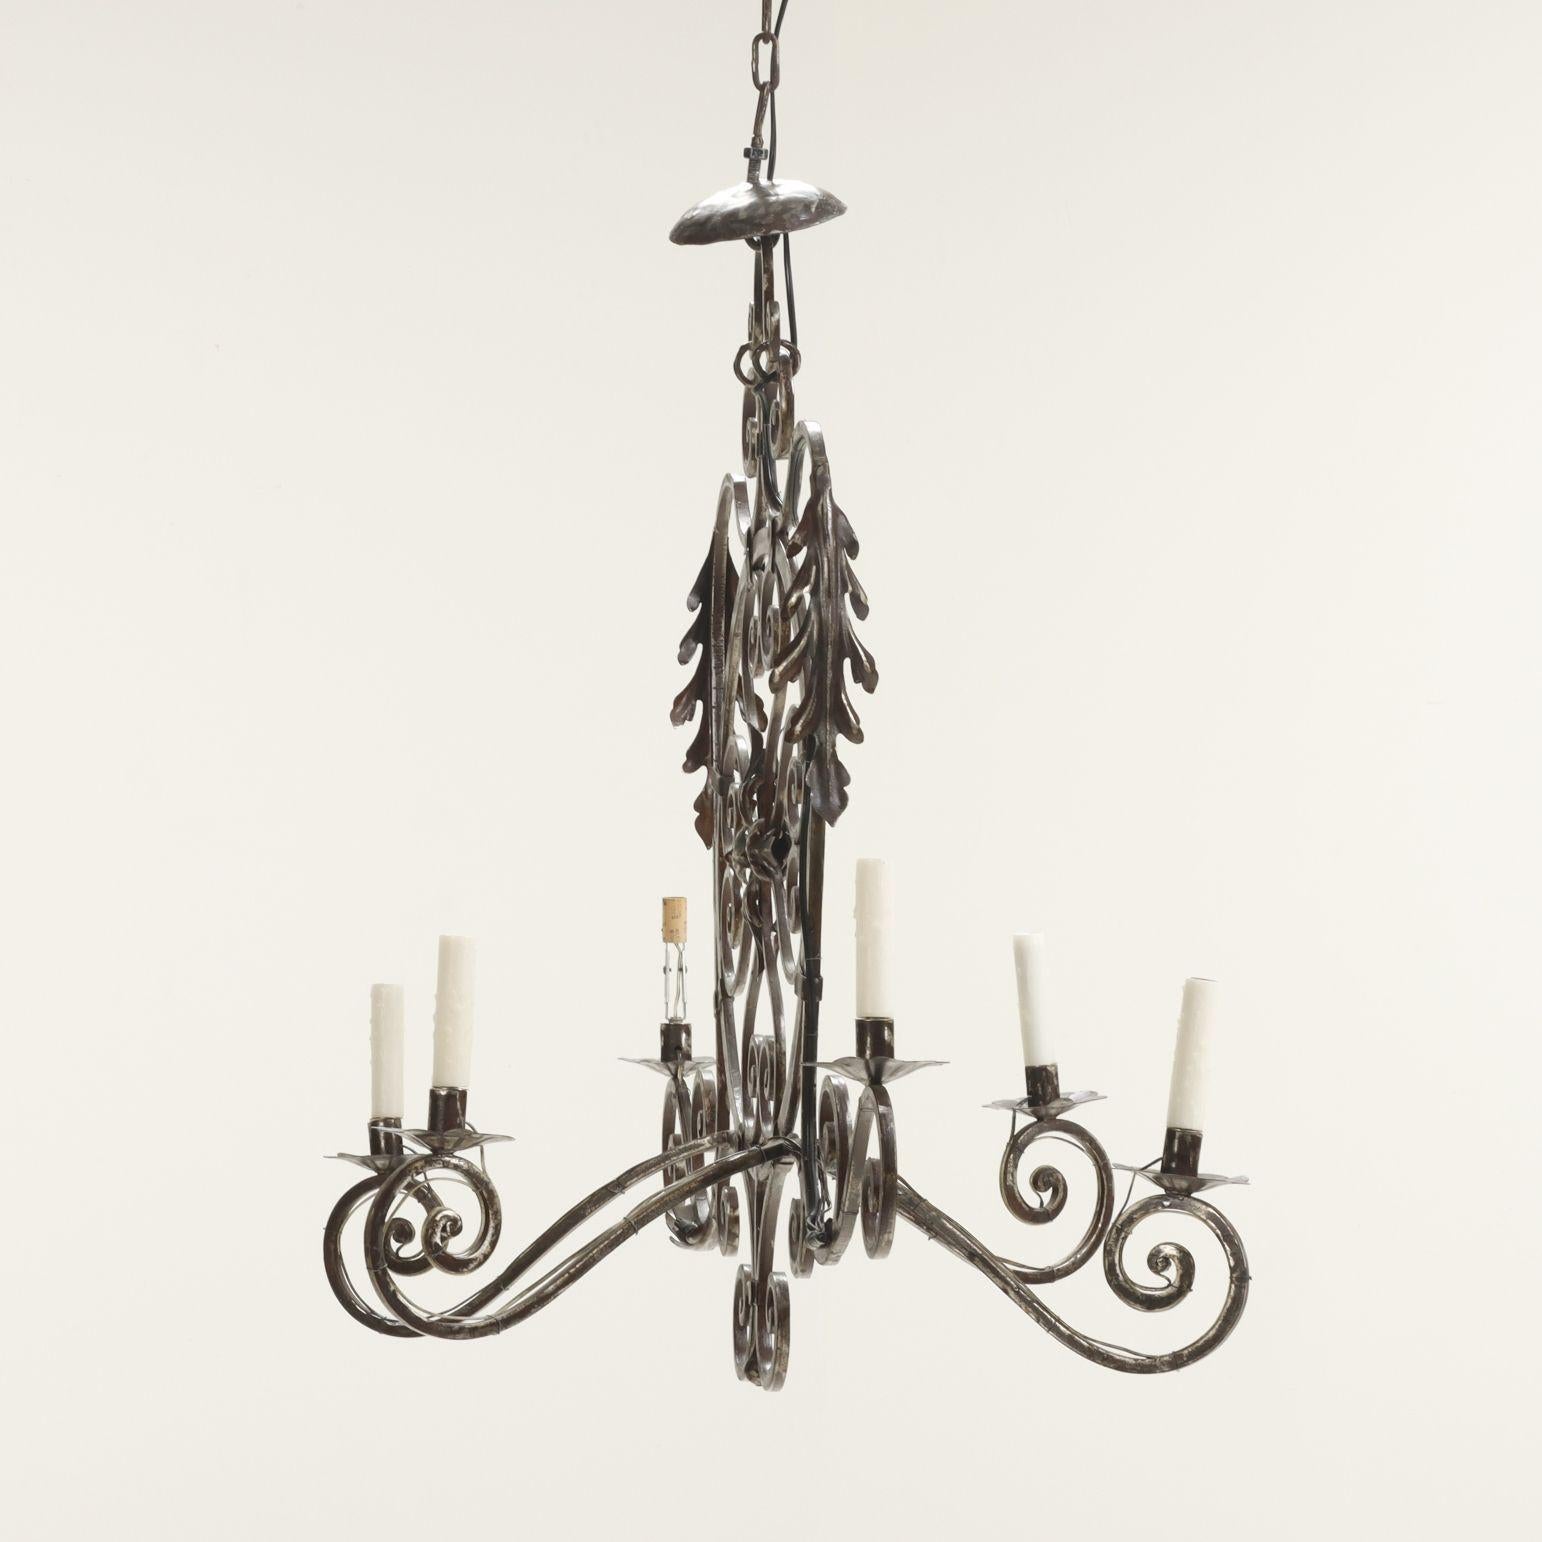 19th Century French Provincial Decorative Steel Chandelier. Good proportions with six candle arms. Made in the south of France circa 1880.